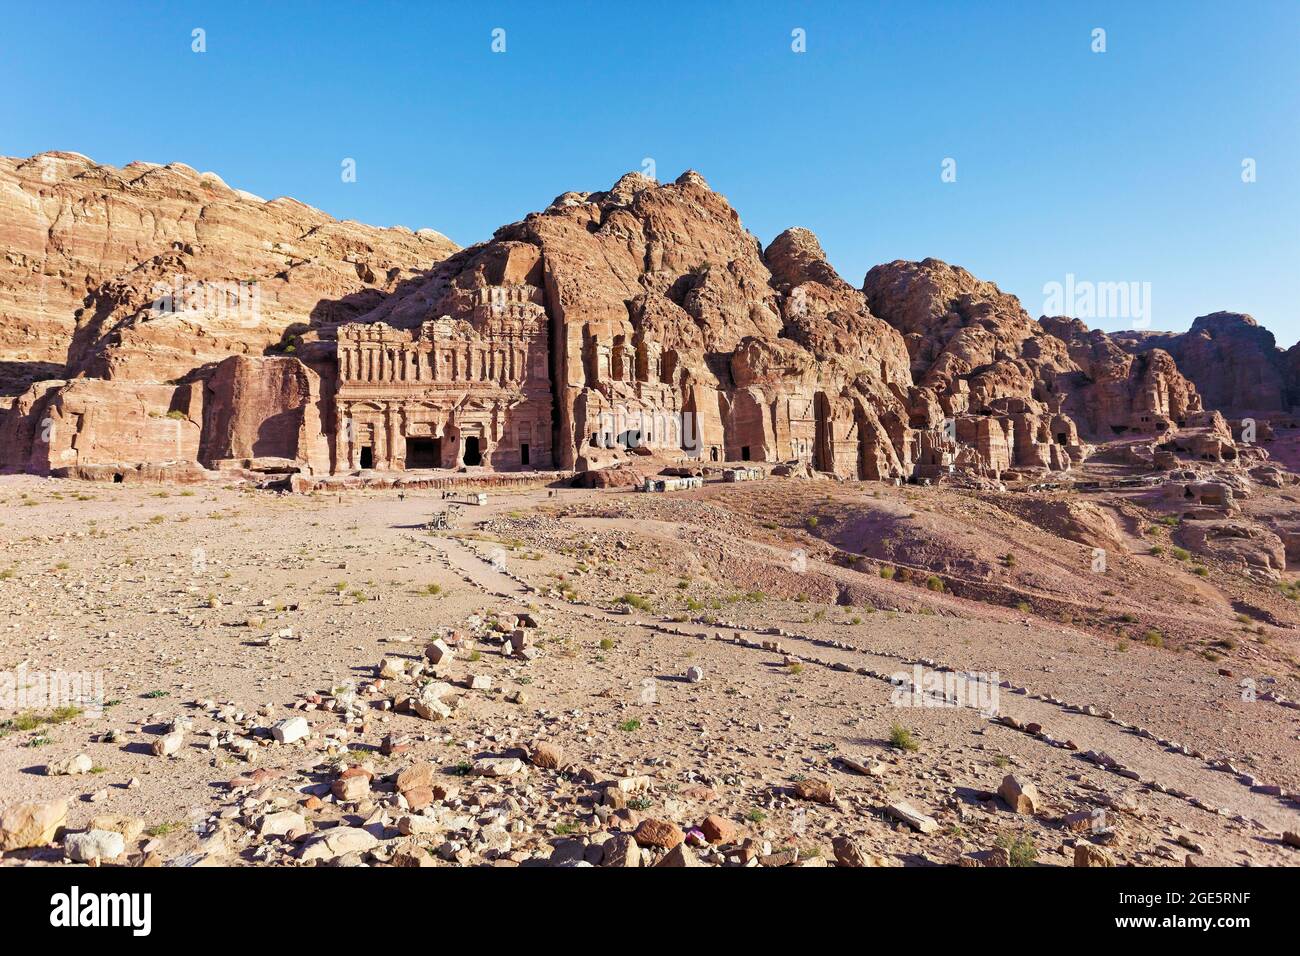 Royal tombs on the western slope of Jabal al-Khubtha, Petra, ancient capital of the Nabataeans, UNESCO World Heritage Site, Kingdom of Jordan Stock Photo